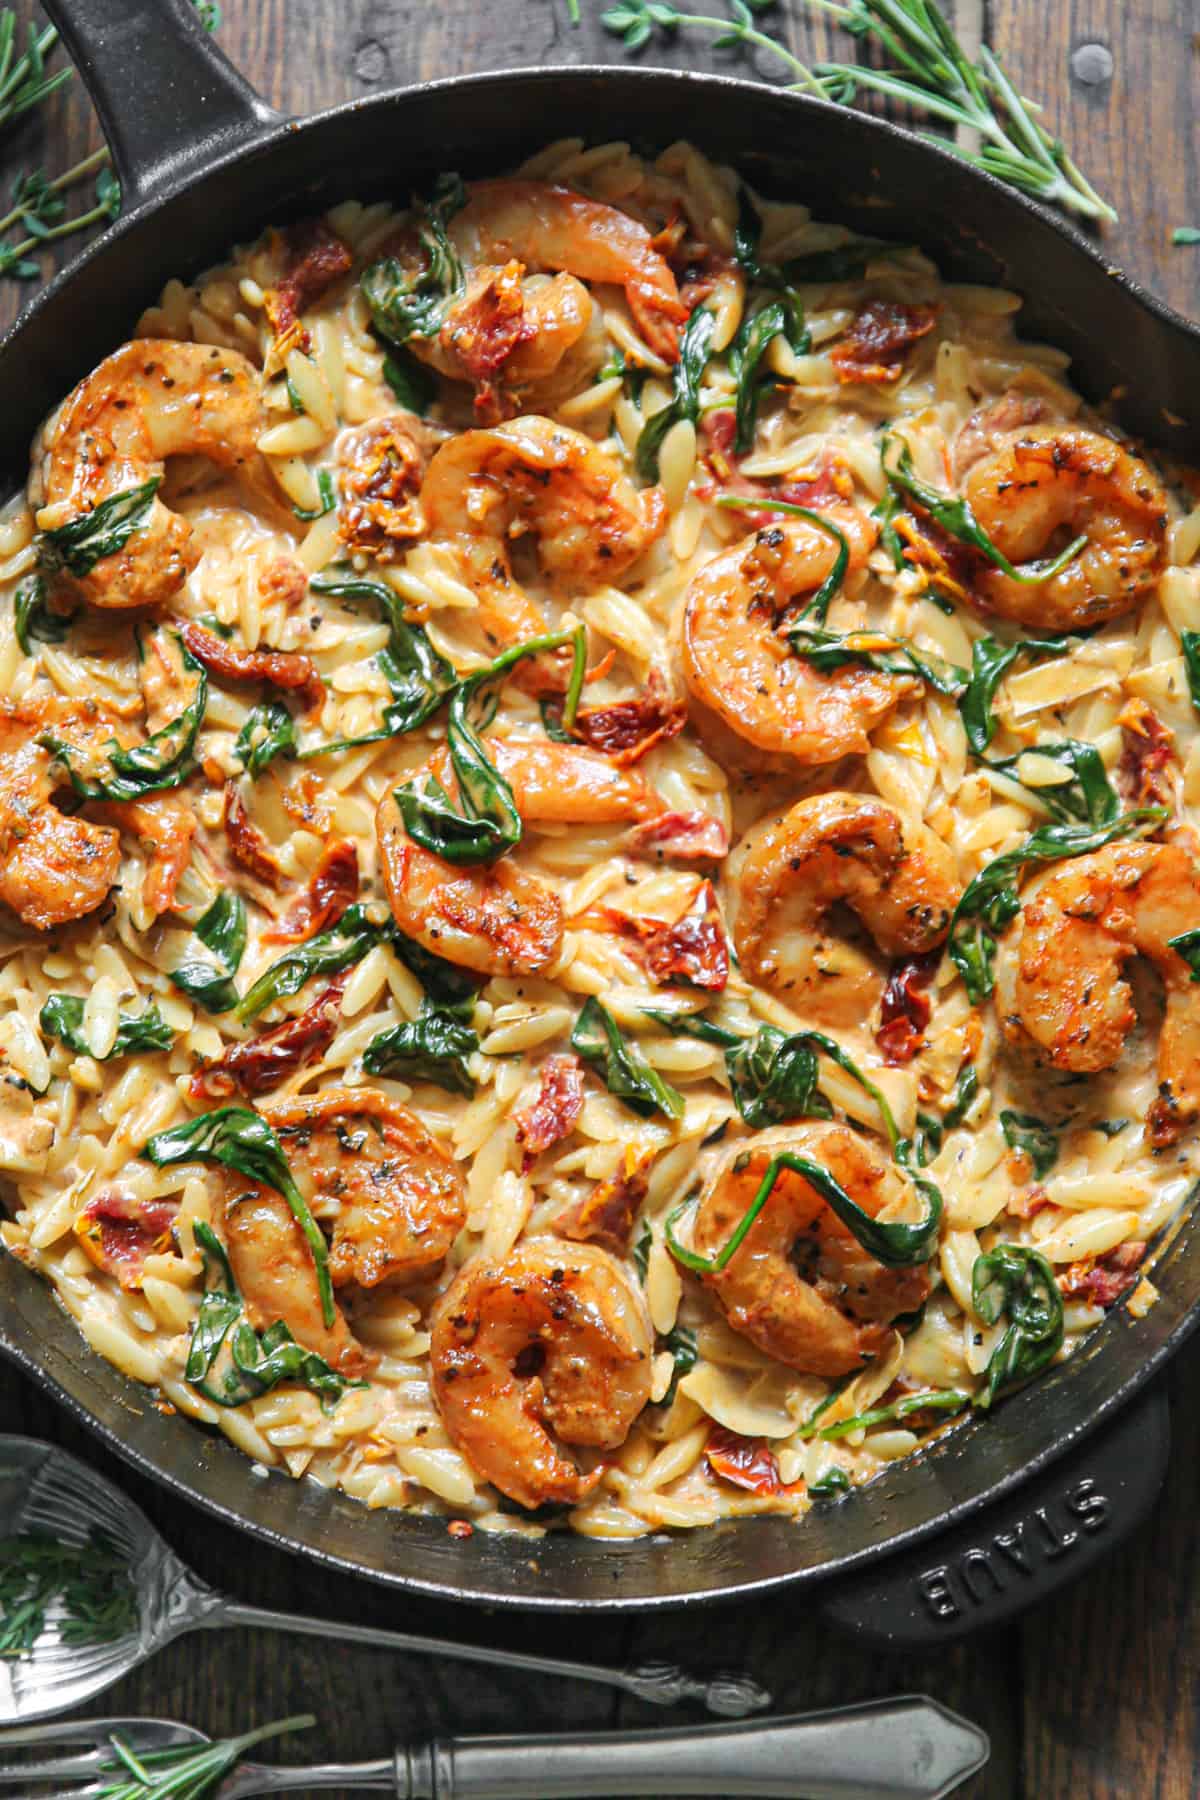 Creamy Shrimp Orzo with Sun-Dried Tomatoes, Spinach, Artichokes - in a cast iron skillet.